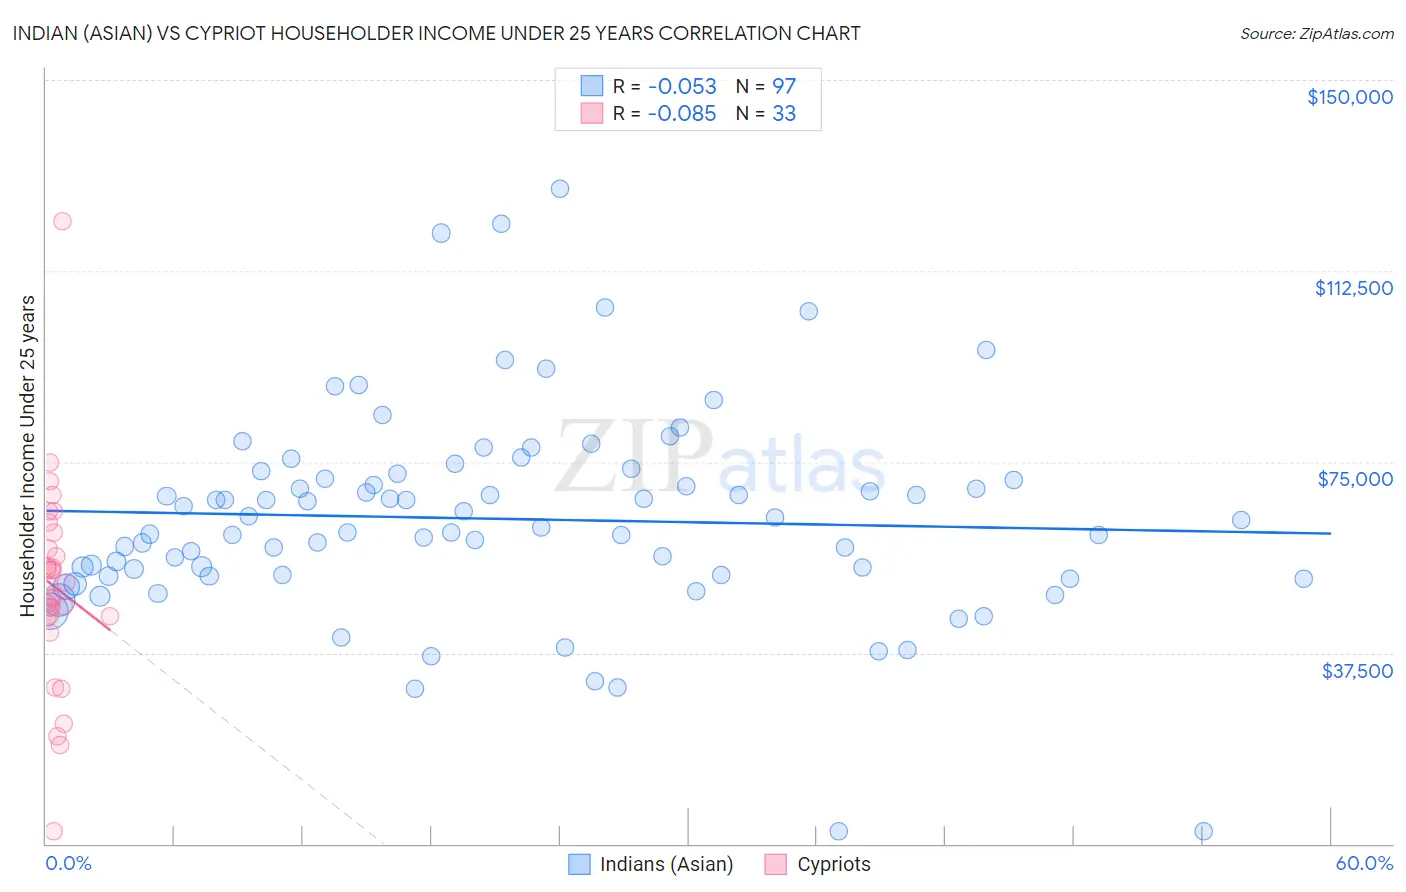 Indian (Asian) vs Cypriot Householder Income Under 25 years